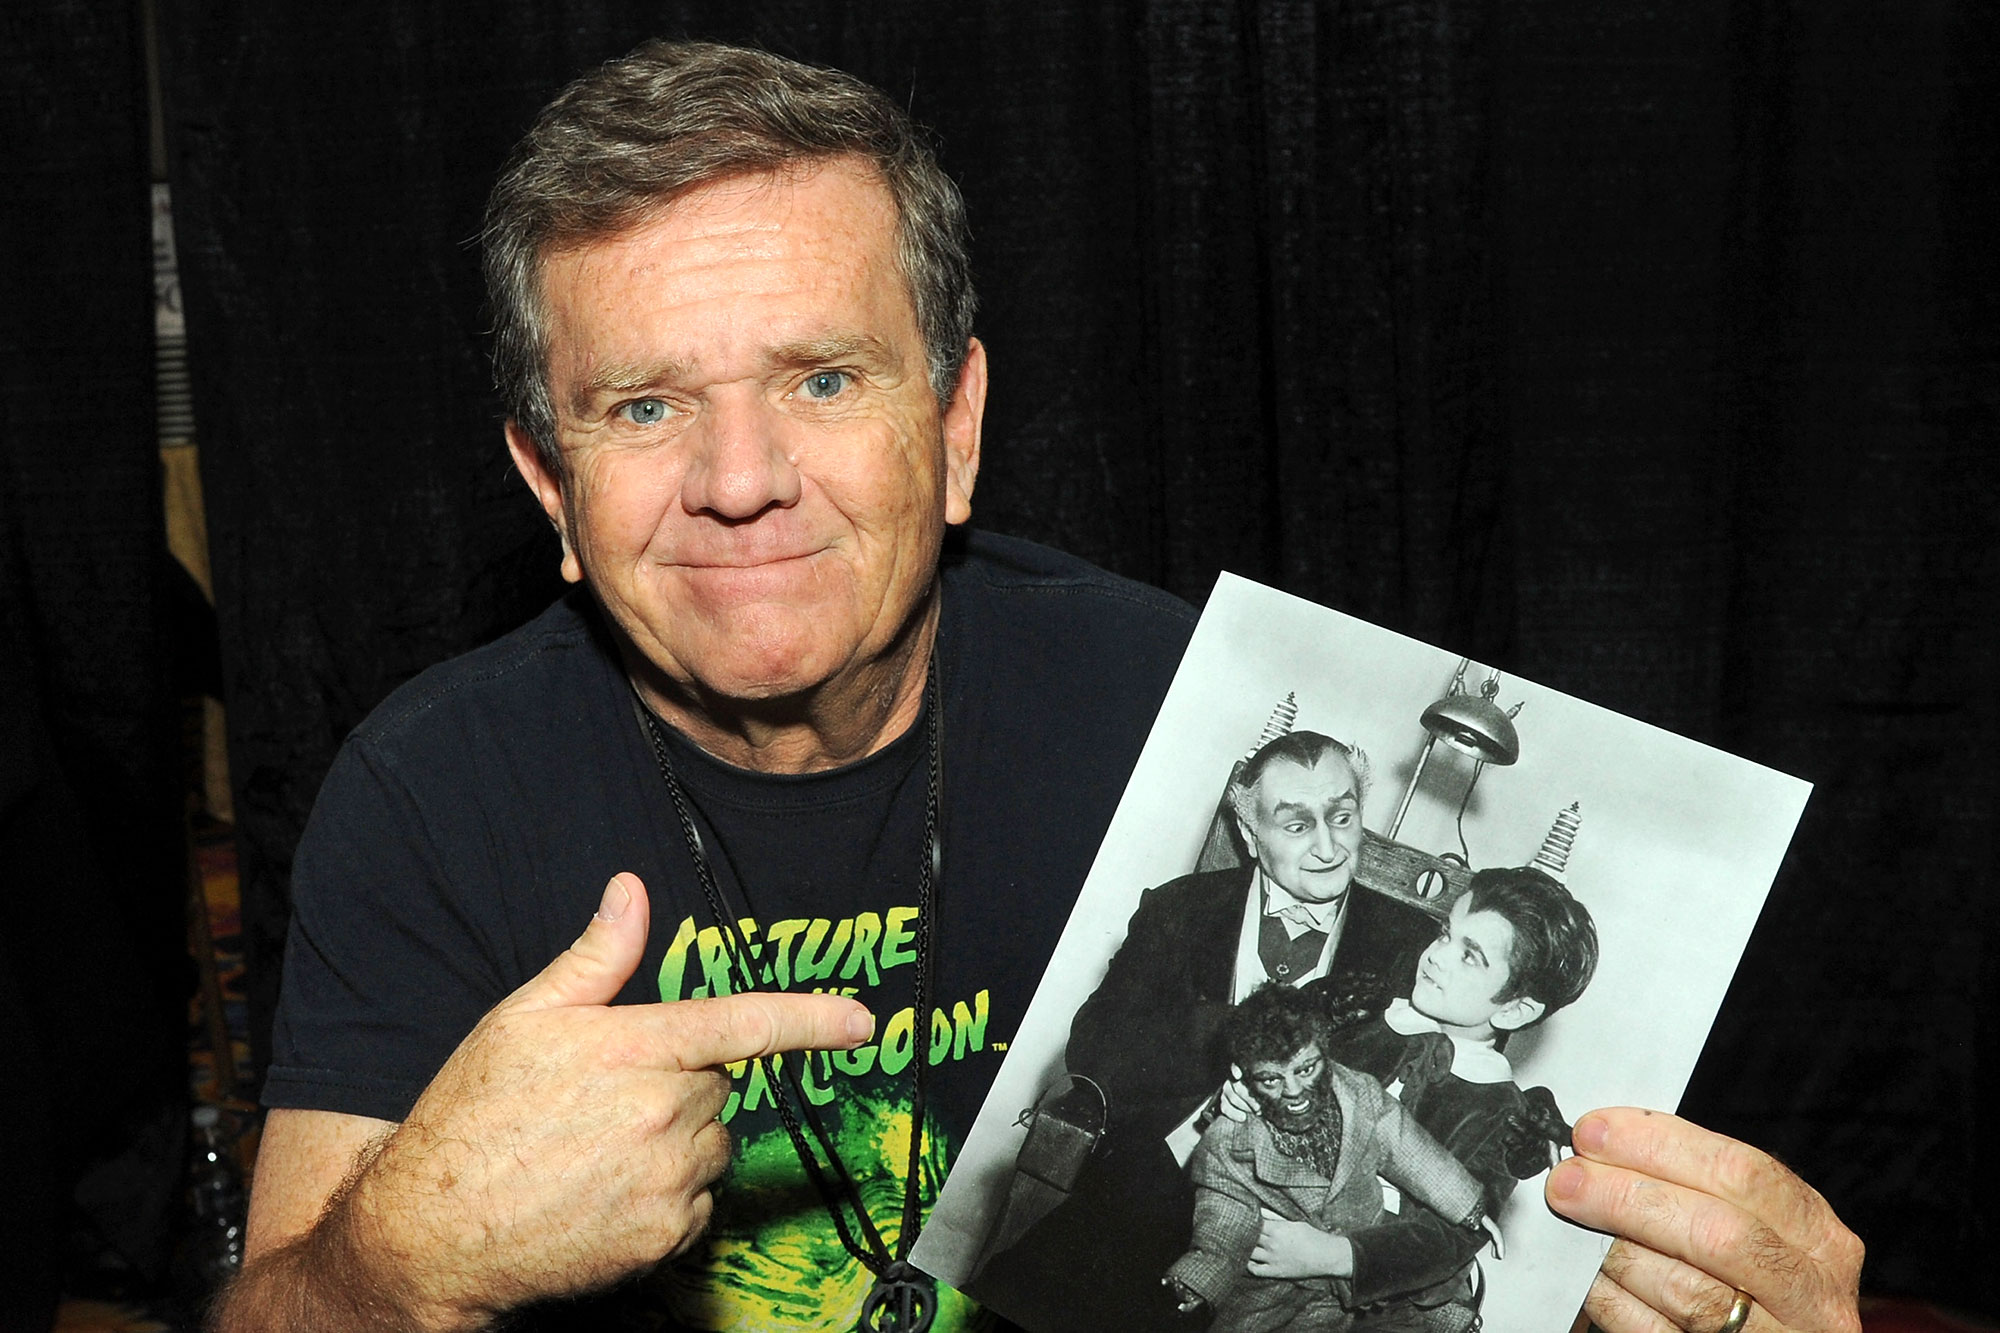 Original Munsters star Butch Patrick to play the Tin Can Man in Rob Zombie's reboot